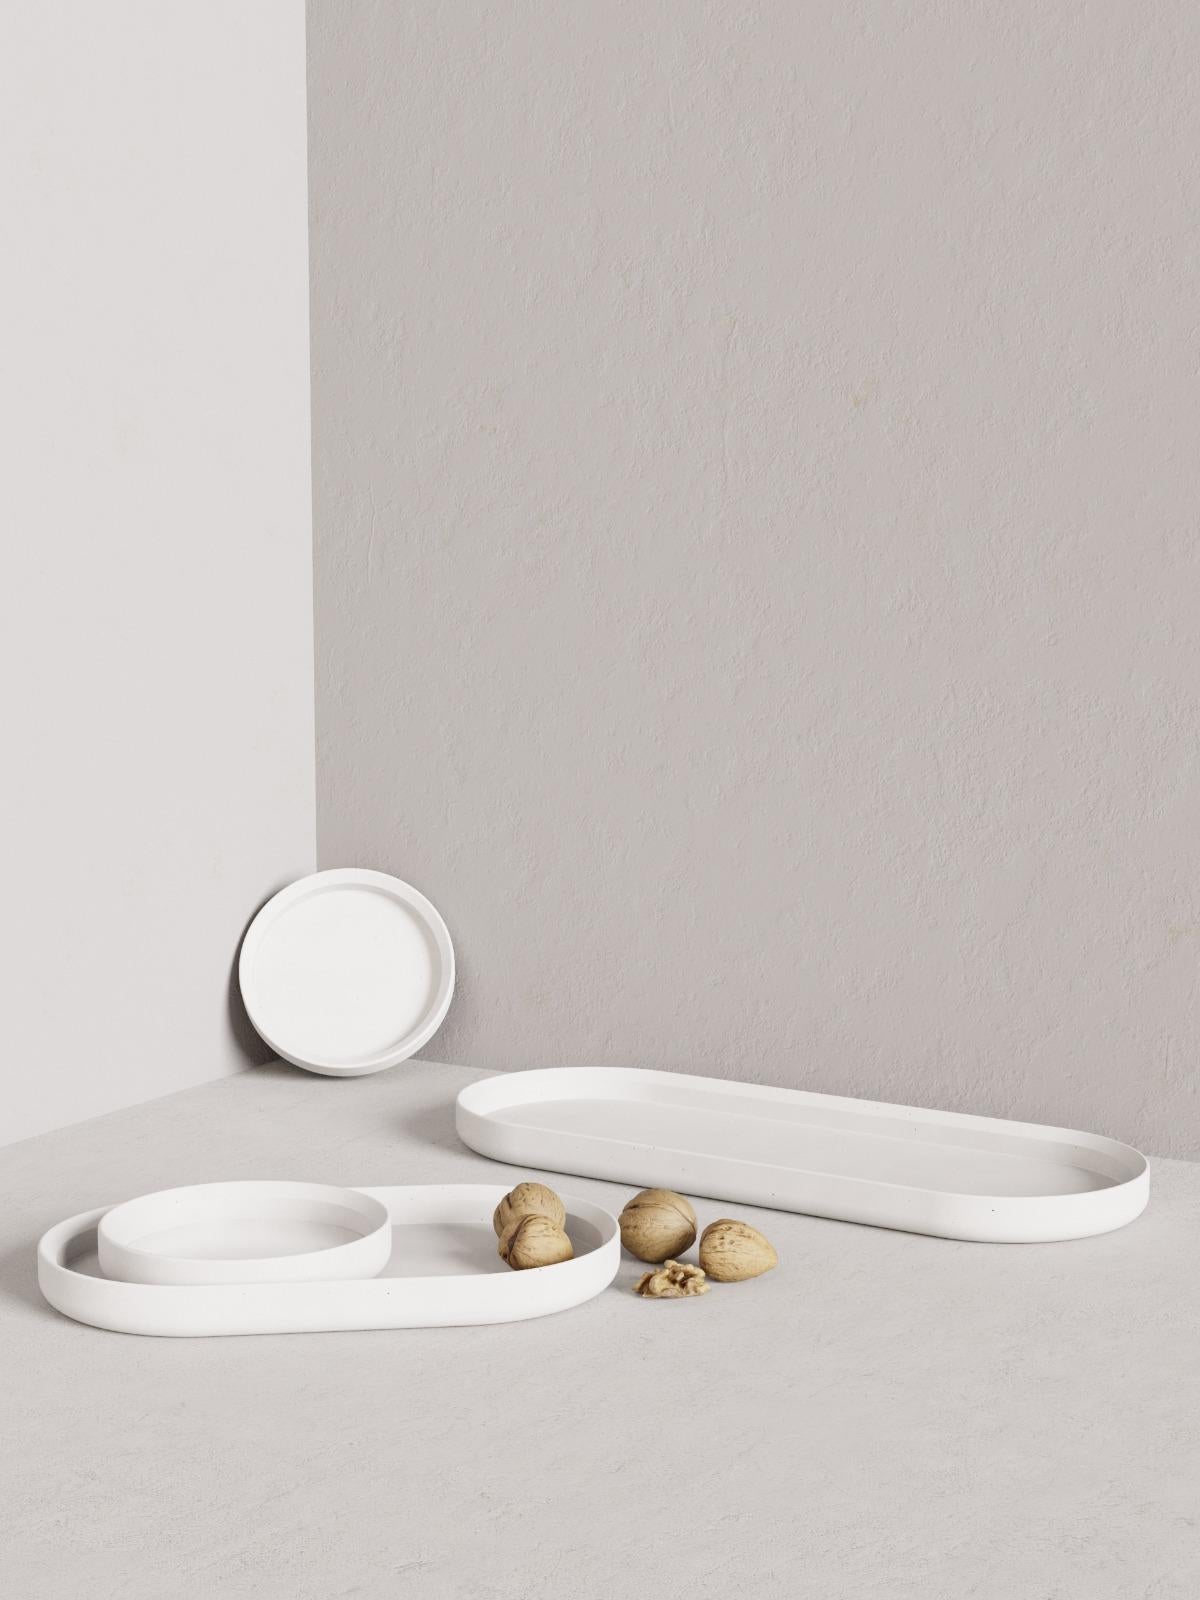 Renzo in a family of multipurpose trays with a very smooth surface and soft curved edges, now available in a different color composition. Each piece is a unique, no two are the same.

Mod I measure: 20 x 20 x 4cm.